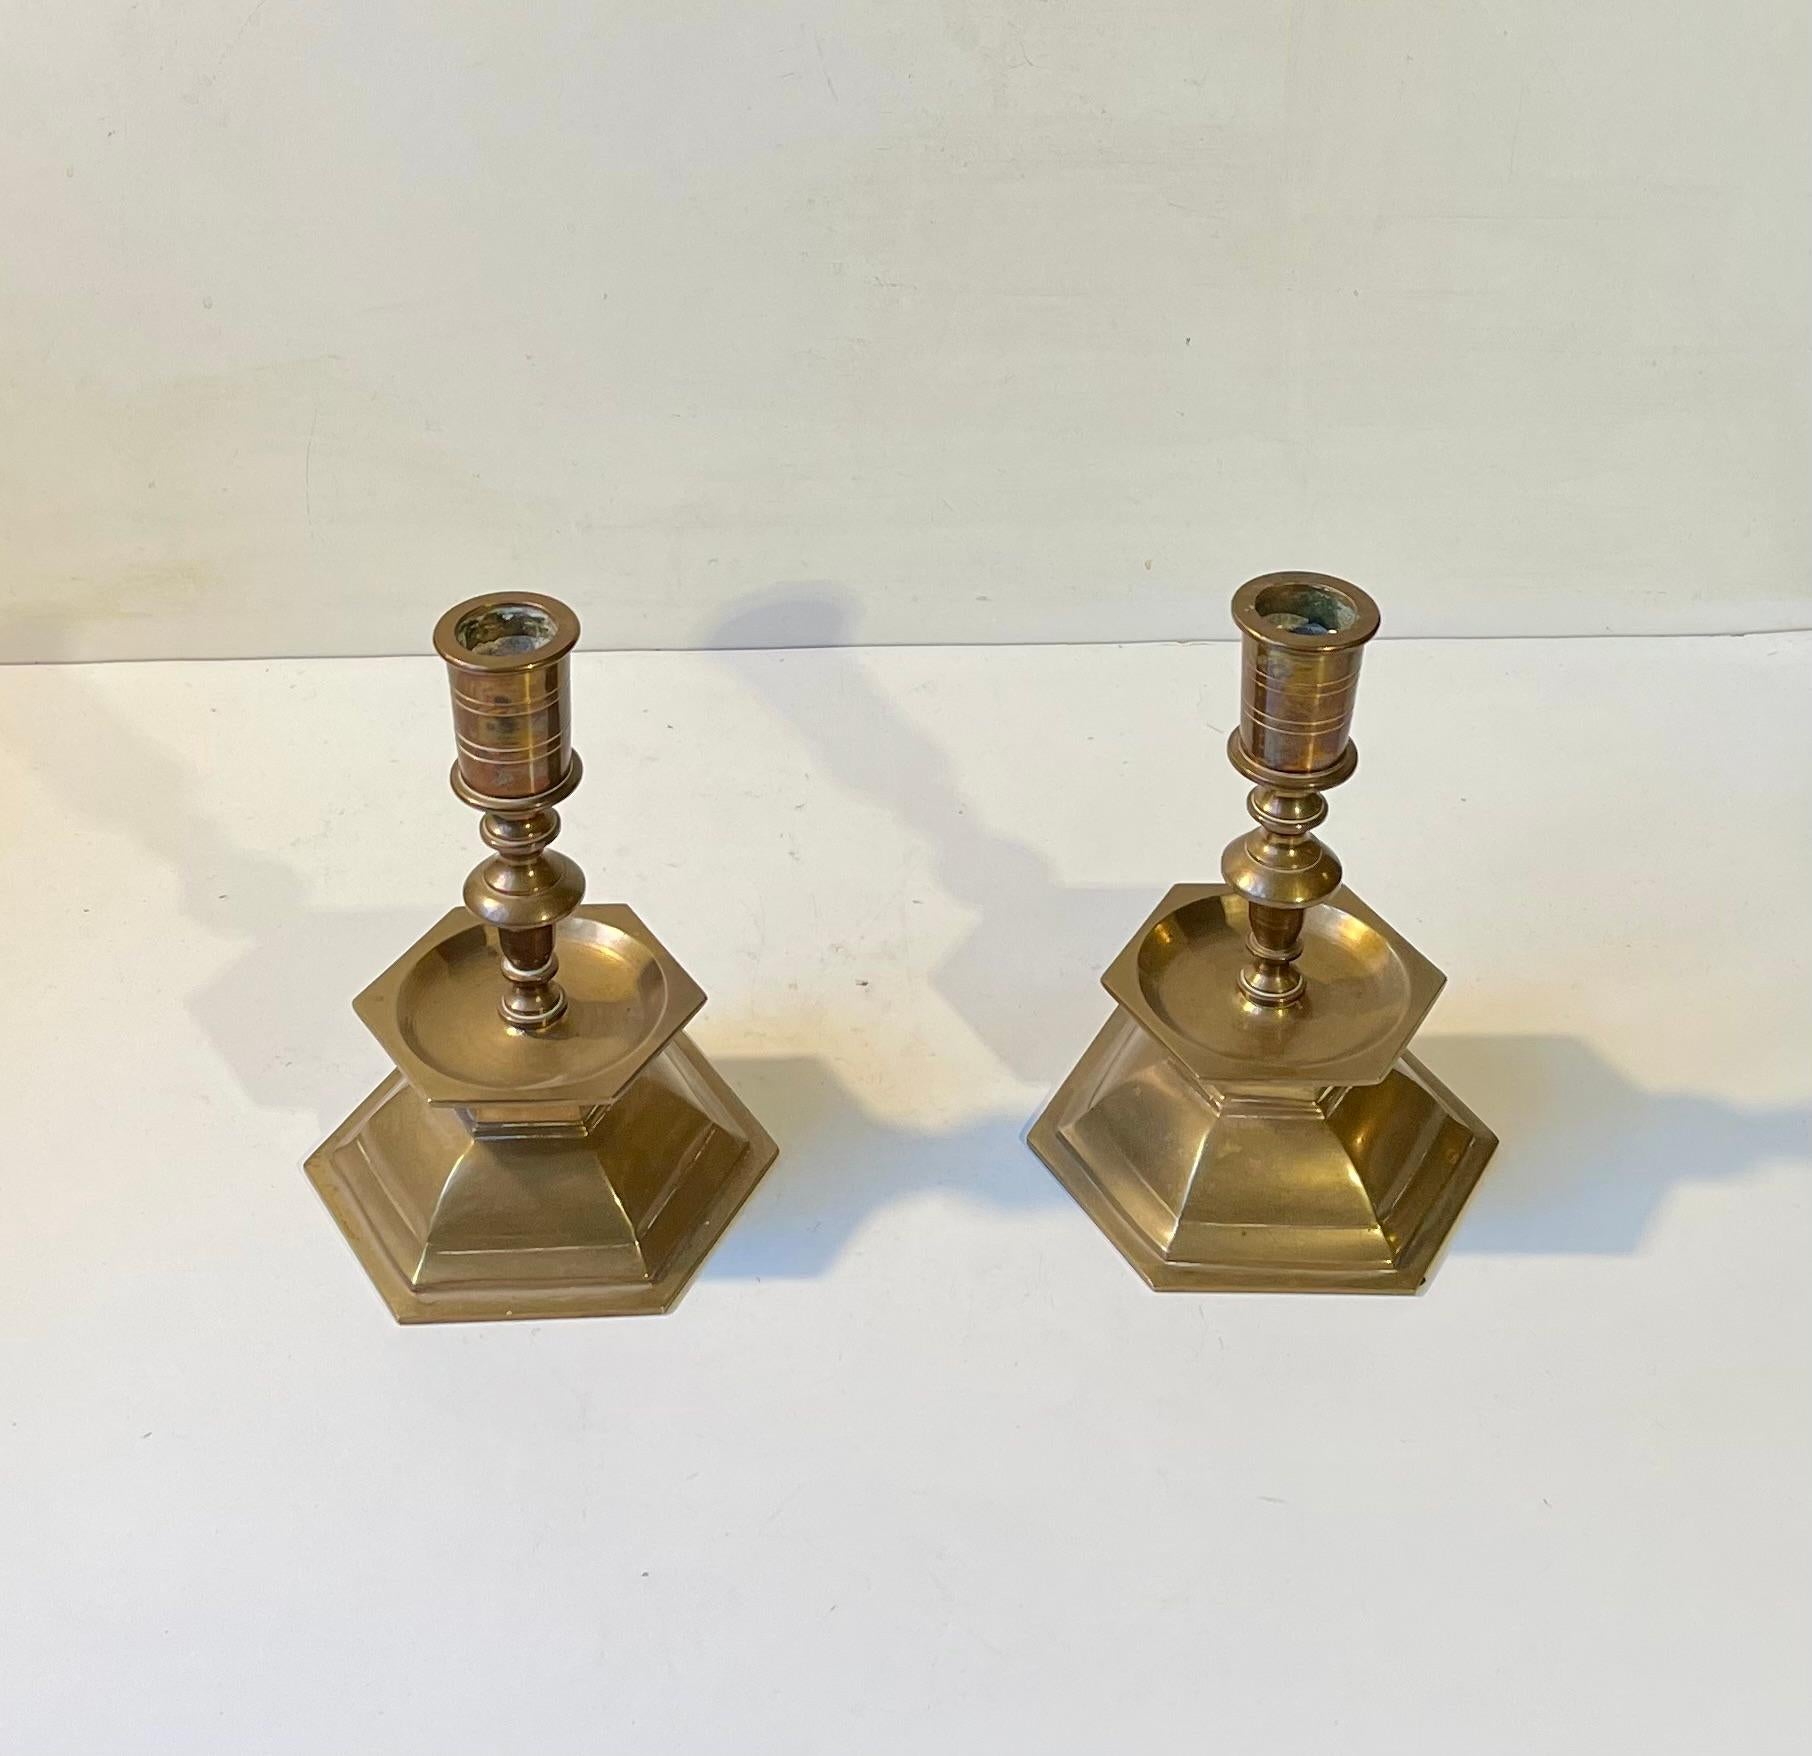 A pair of heavy altar candlesticks in brass. These came out of a Church Near Ribe in the western part of Denmark. The design is very plain despite their Baroque inspired shape. They have not been polished recently and the patina is overall and